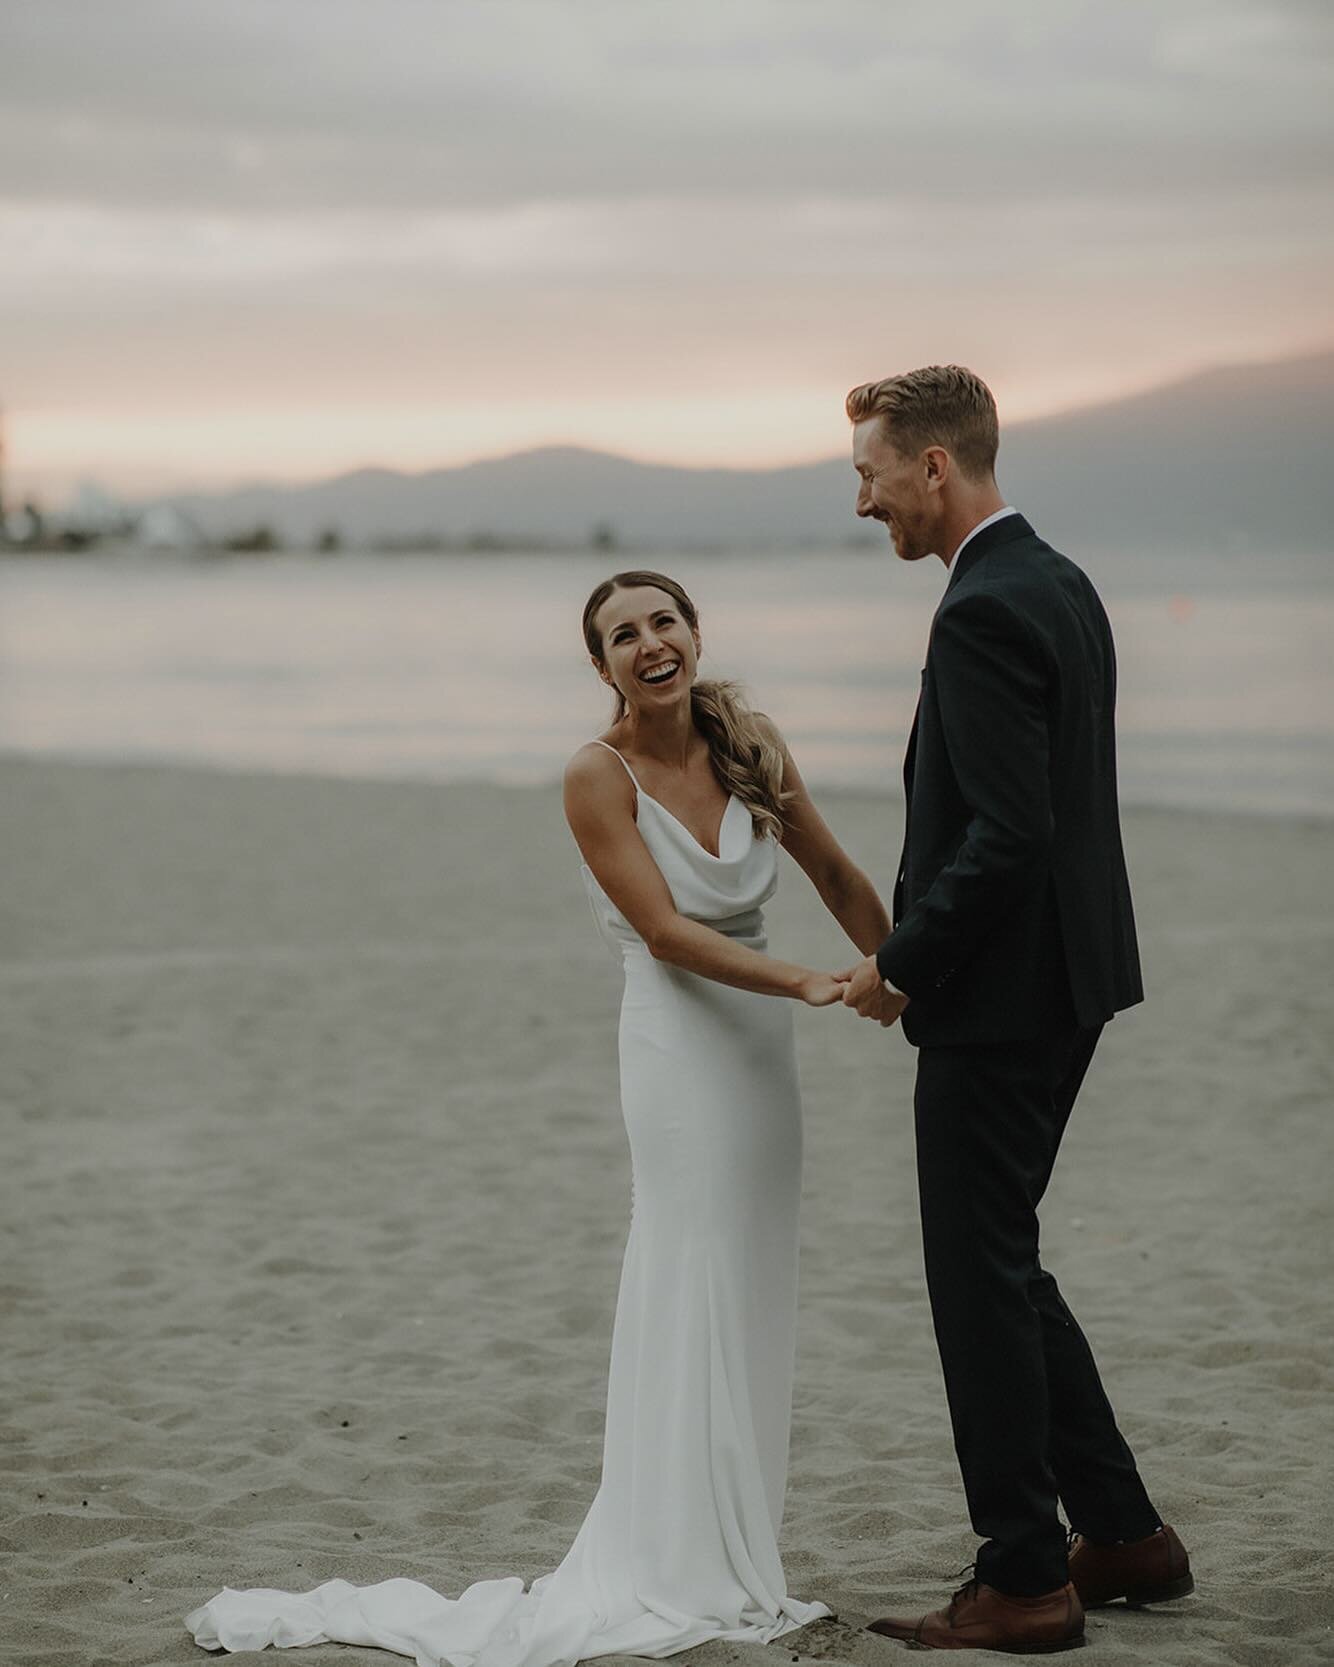 Gentle waves and the golden glow of sun create the beachfront backdrop at Brock House 🌅

Our venue provides a dreamy beachfront location that sets the stage for capturing the most beautiful wedding photos, especially during the enchanting embrace of